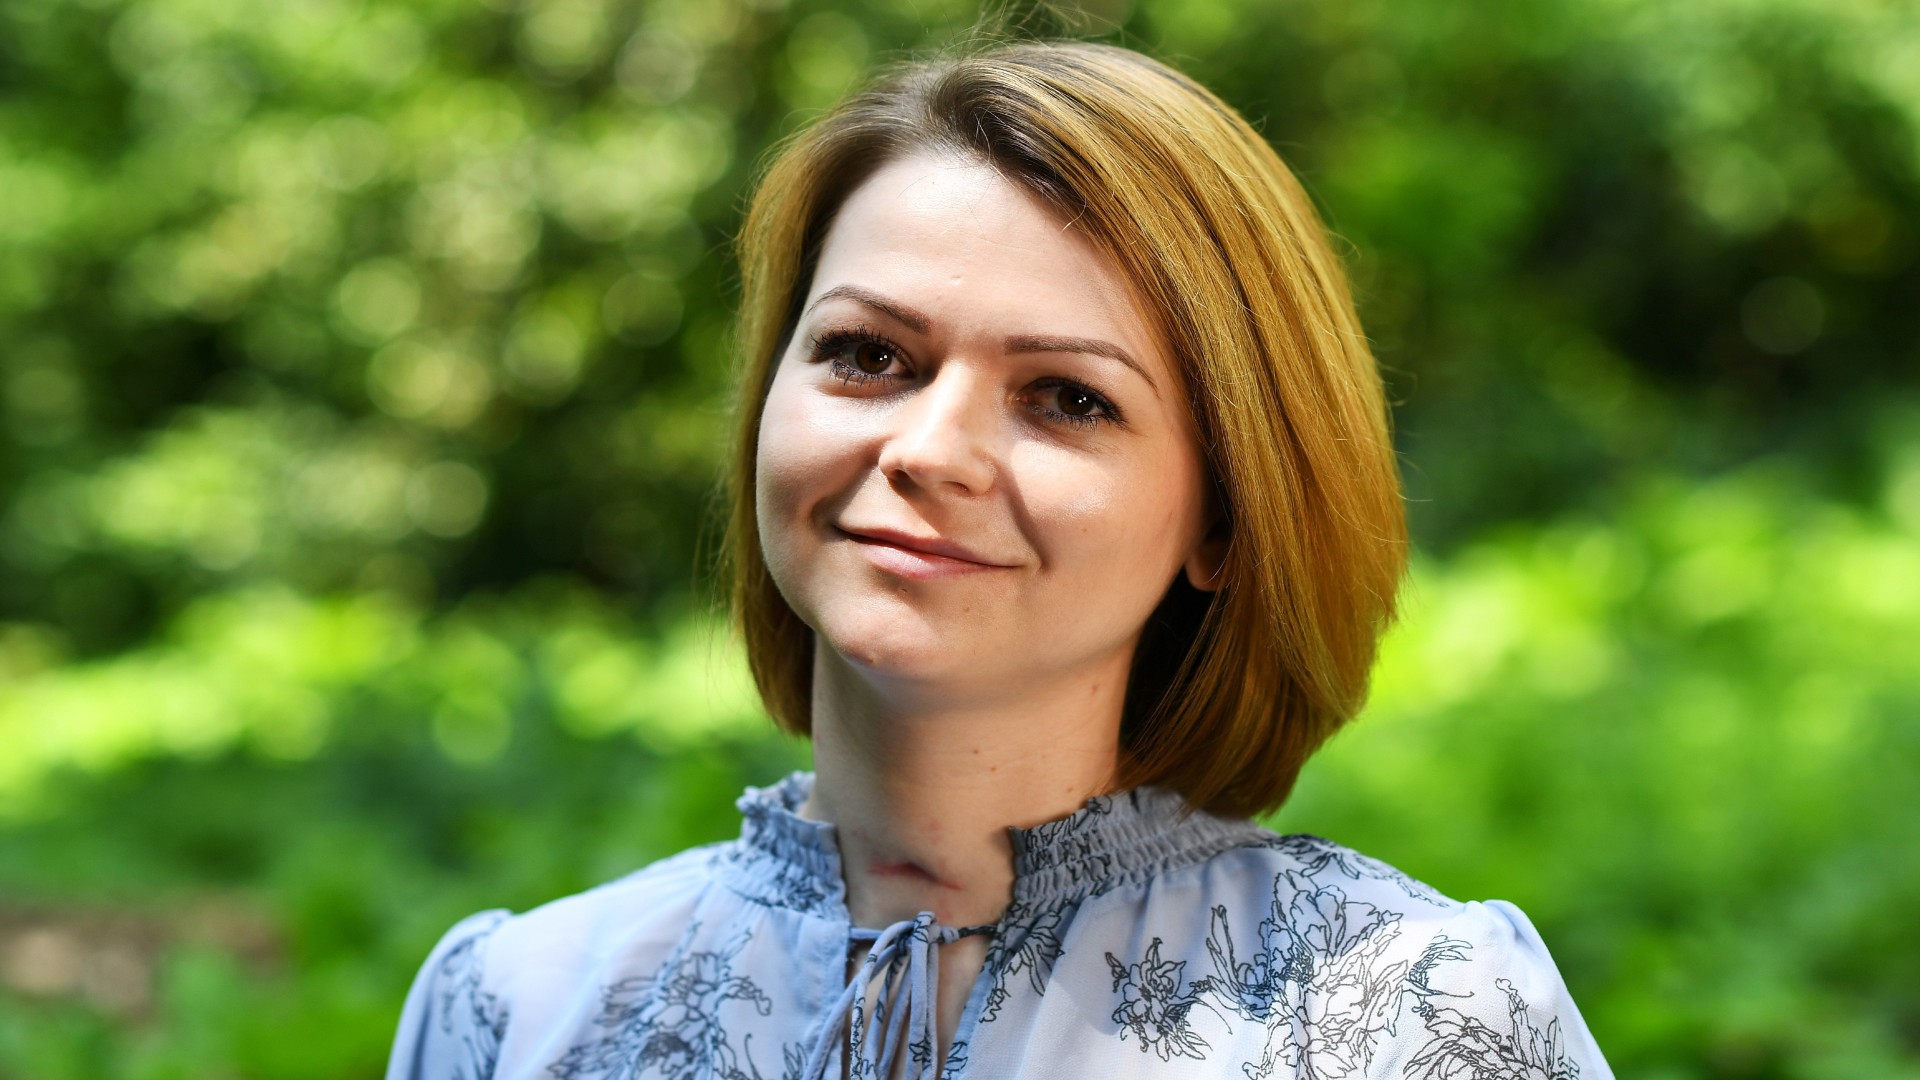 Yulia Skripal was poisoned along with her father, Sergei Skripal